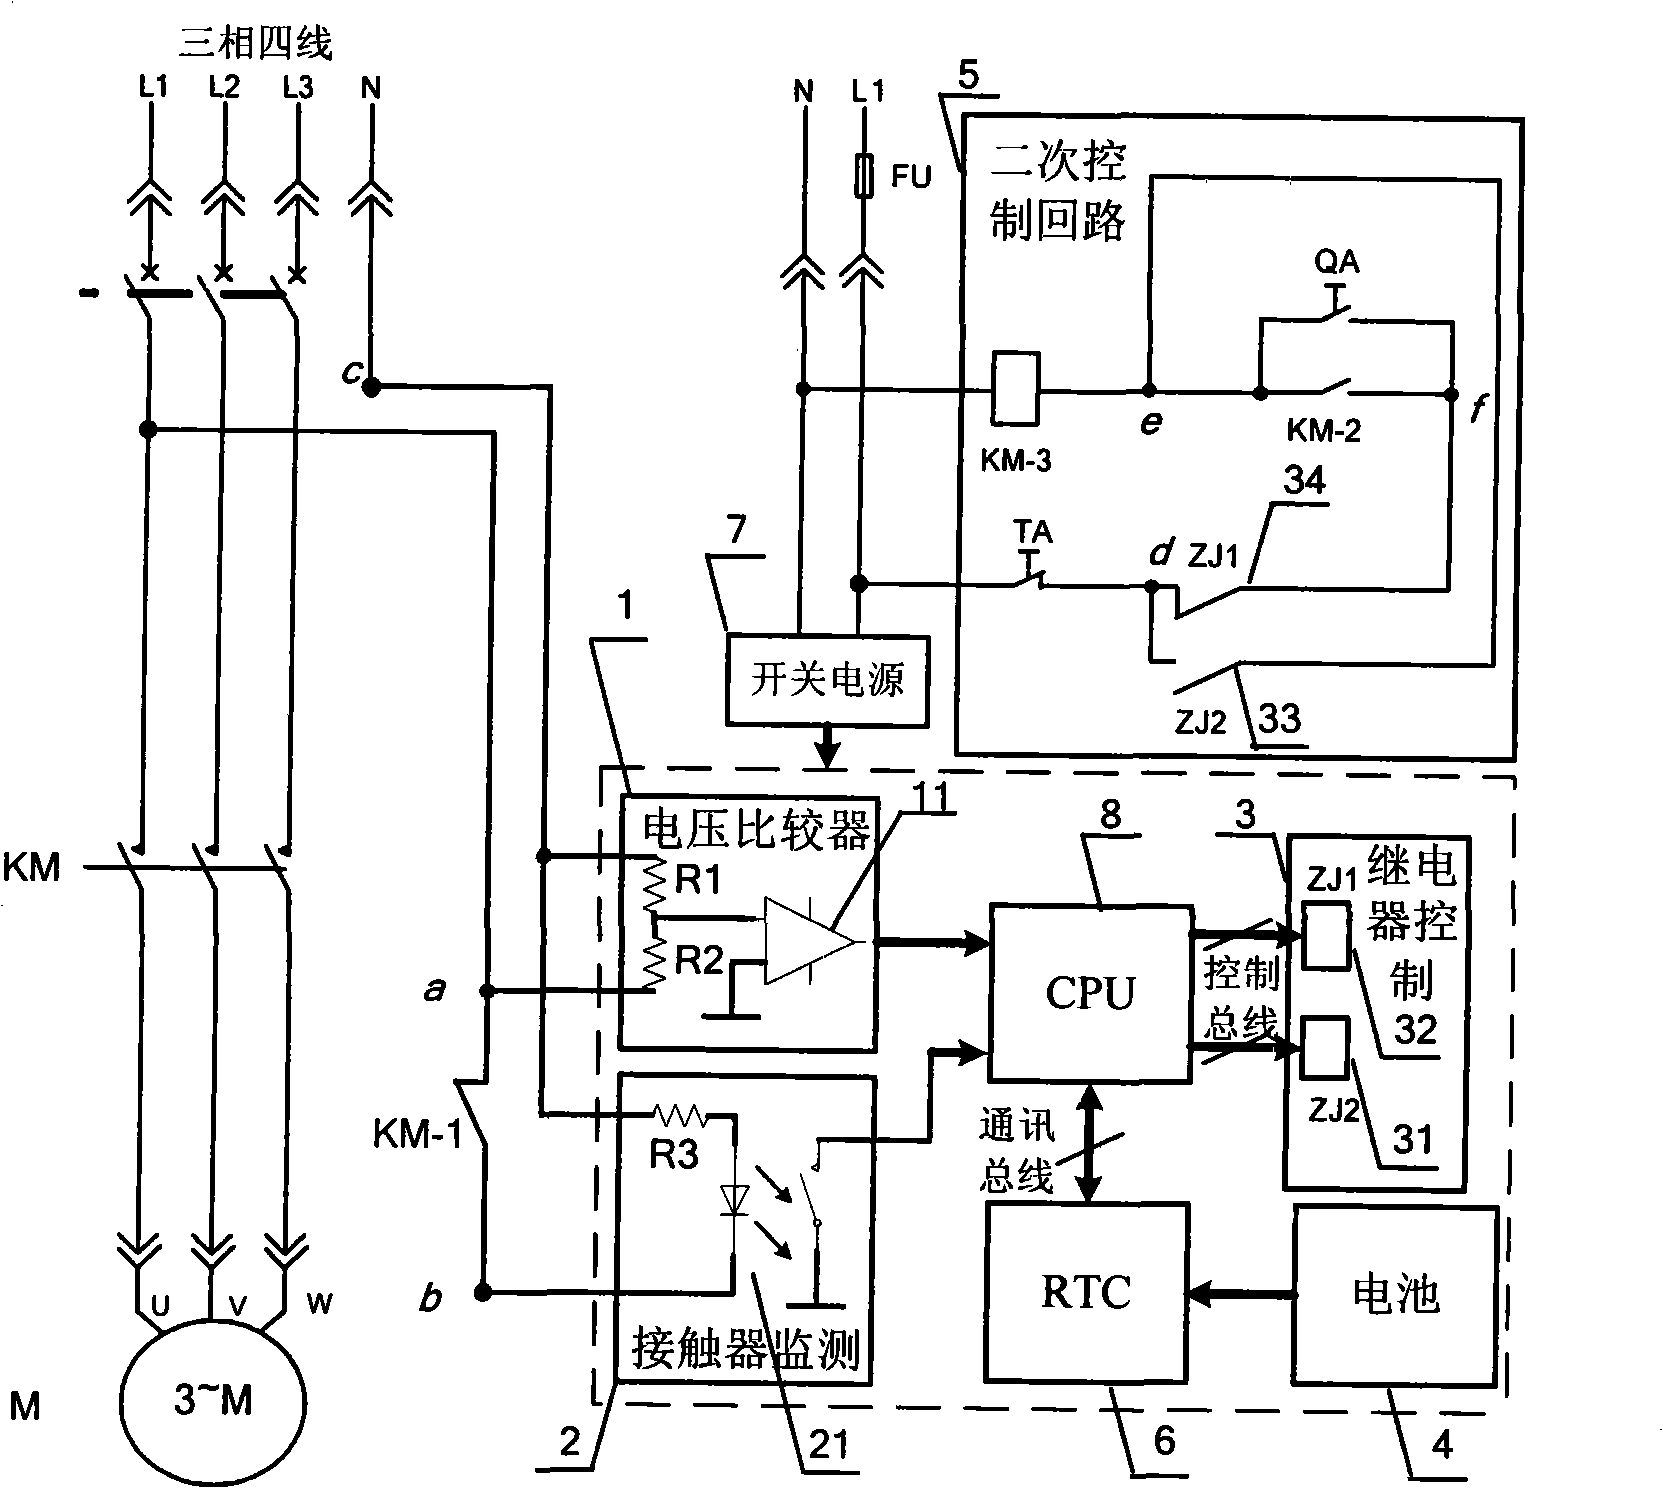 Synthetic apparatus of anti-flashover and protection for low-voltage three phase asynchronous motor